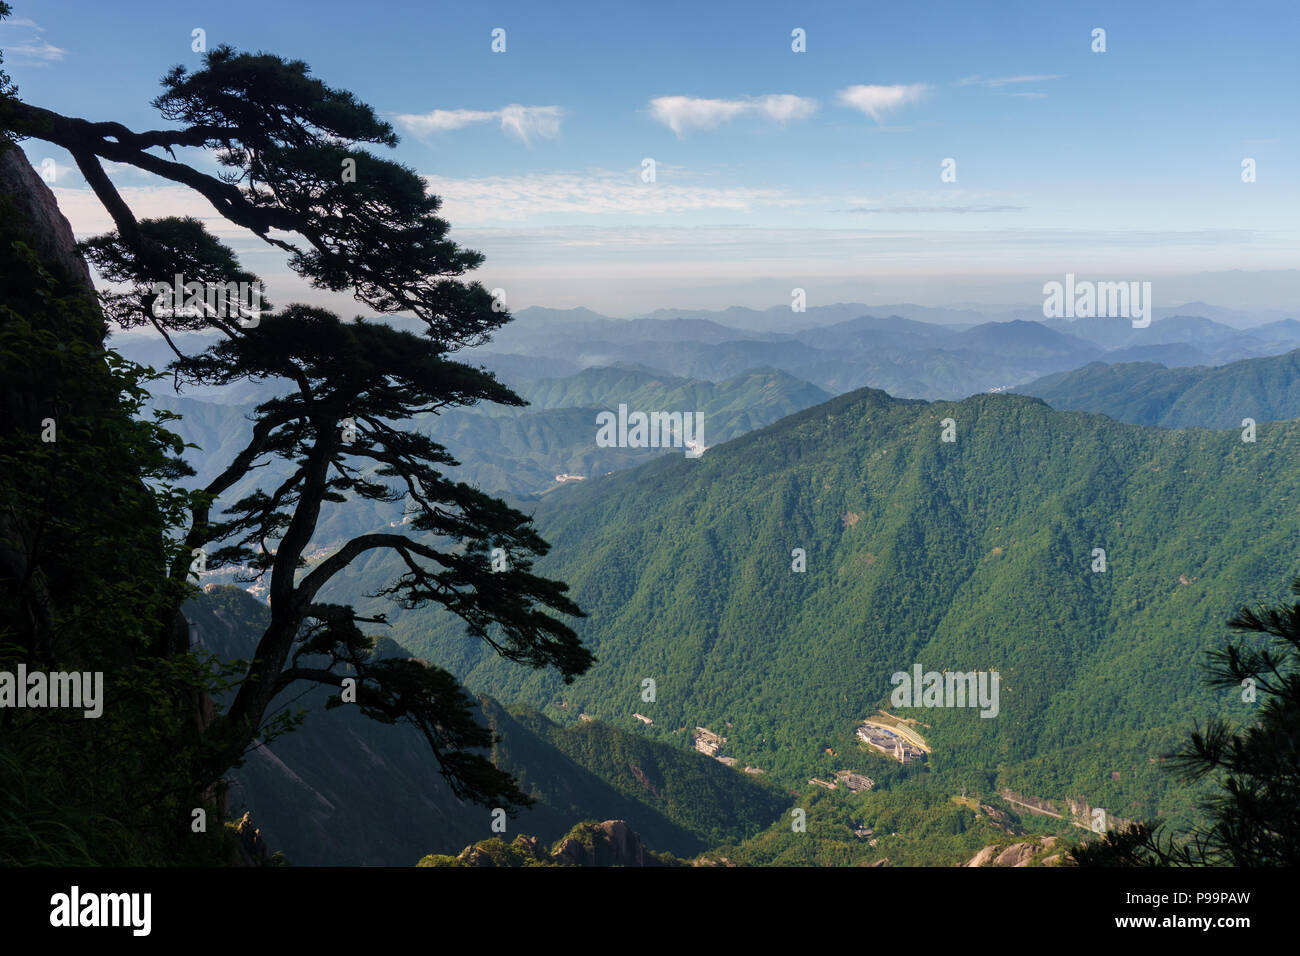 View of foothills of Huansgan over the tzpical pine from the top of Celestial capital peak, eastern China, Anhui. Stock Photo